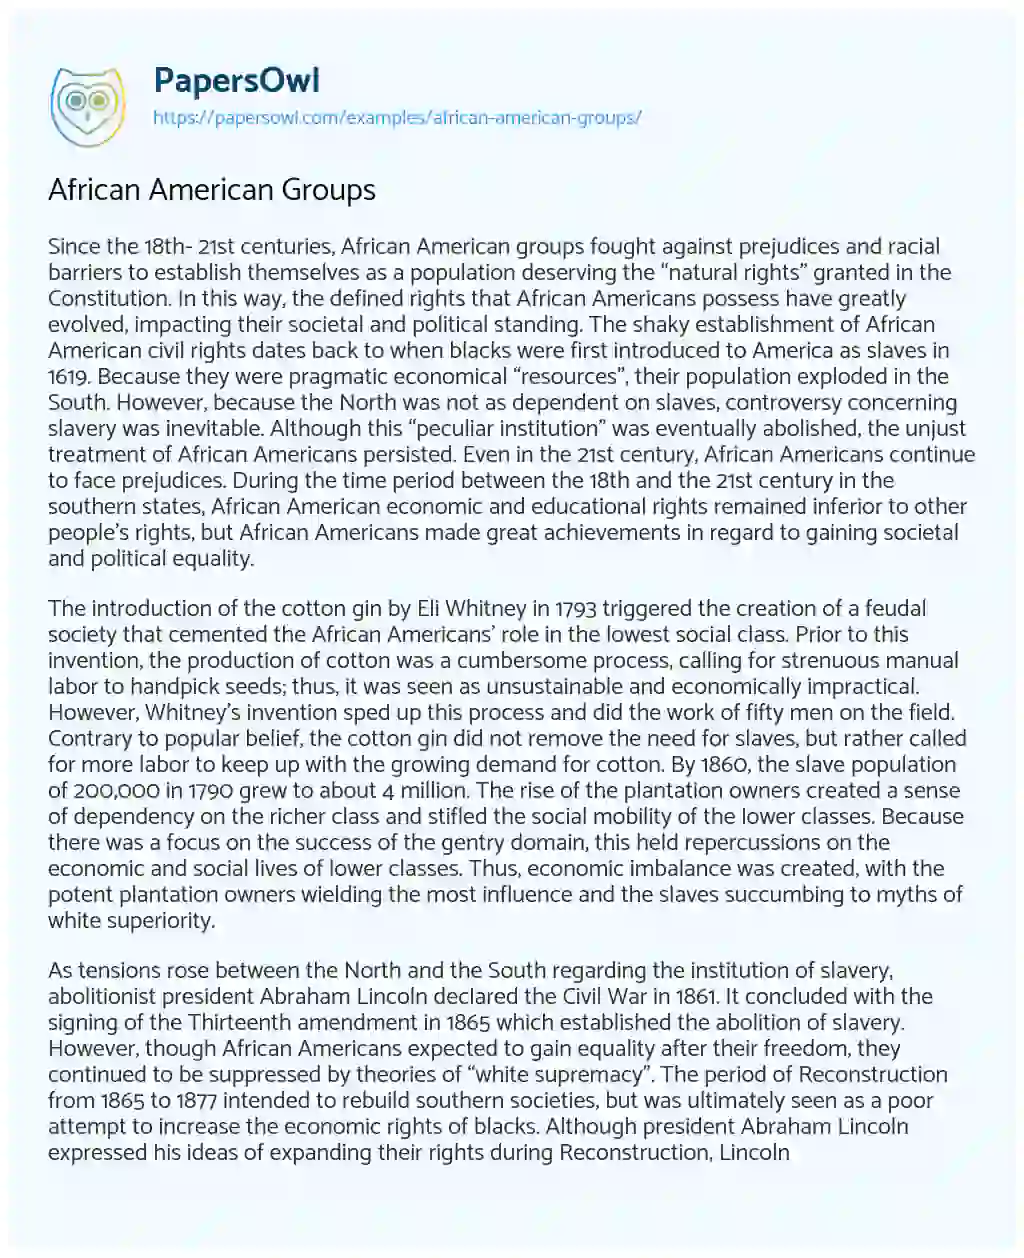 Essay on African American Groups